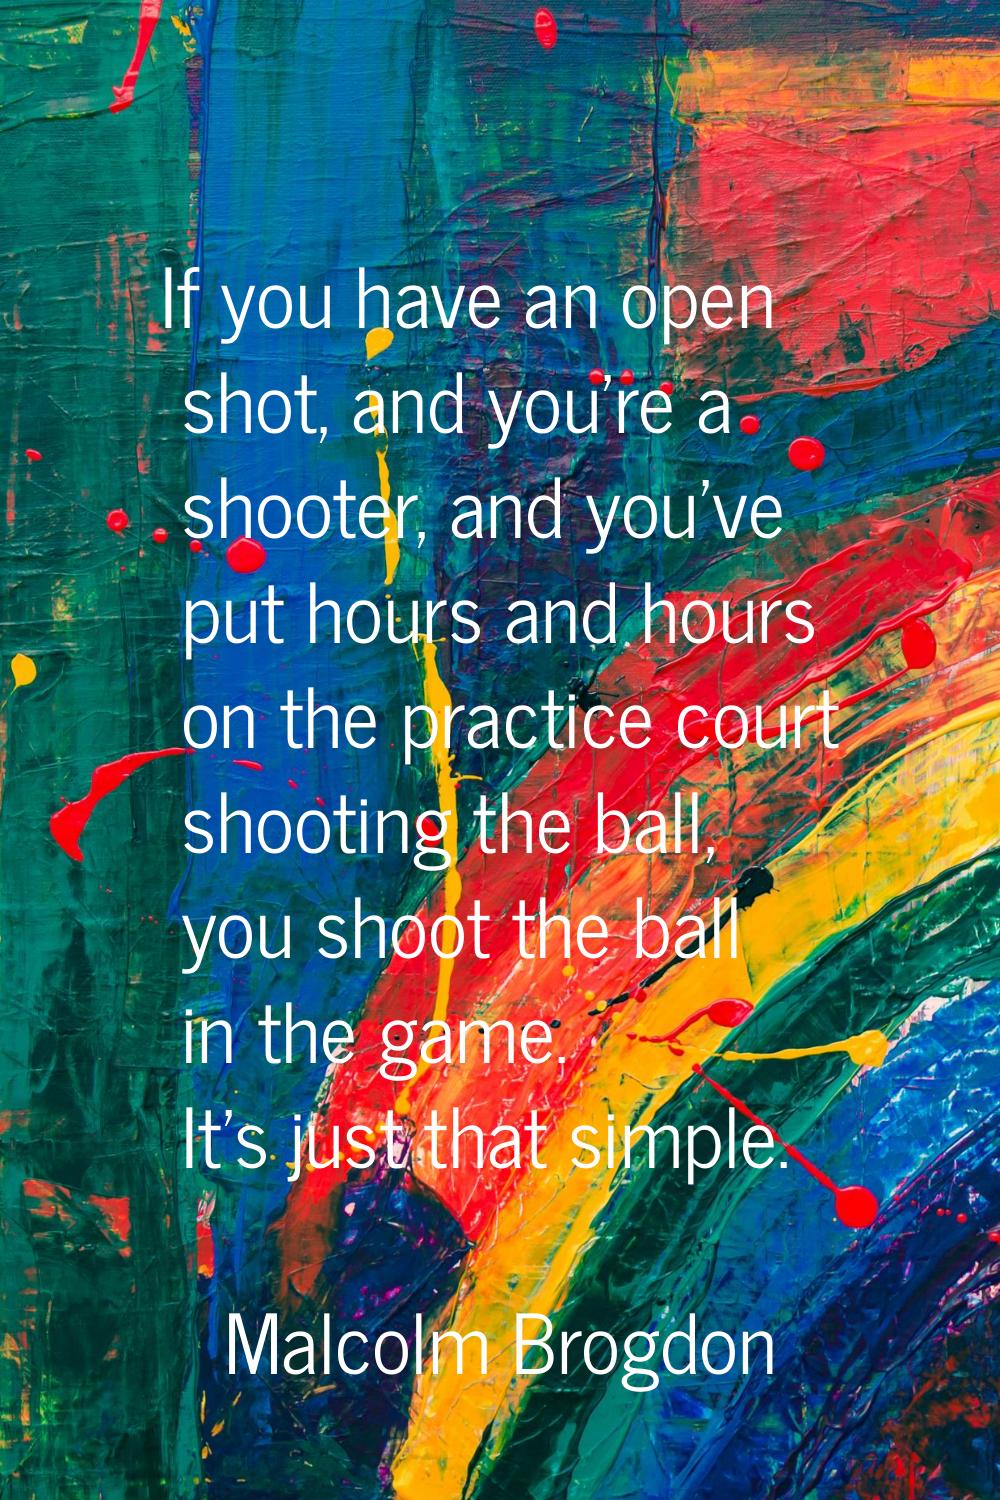 If you have an open shot, and you're a shooter, and you've put hours and hours on the practice cour